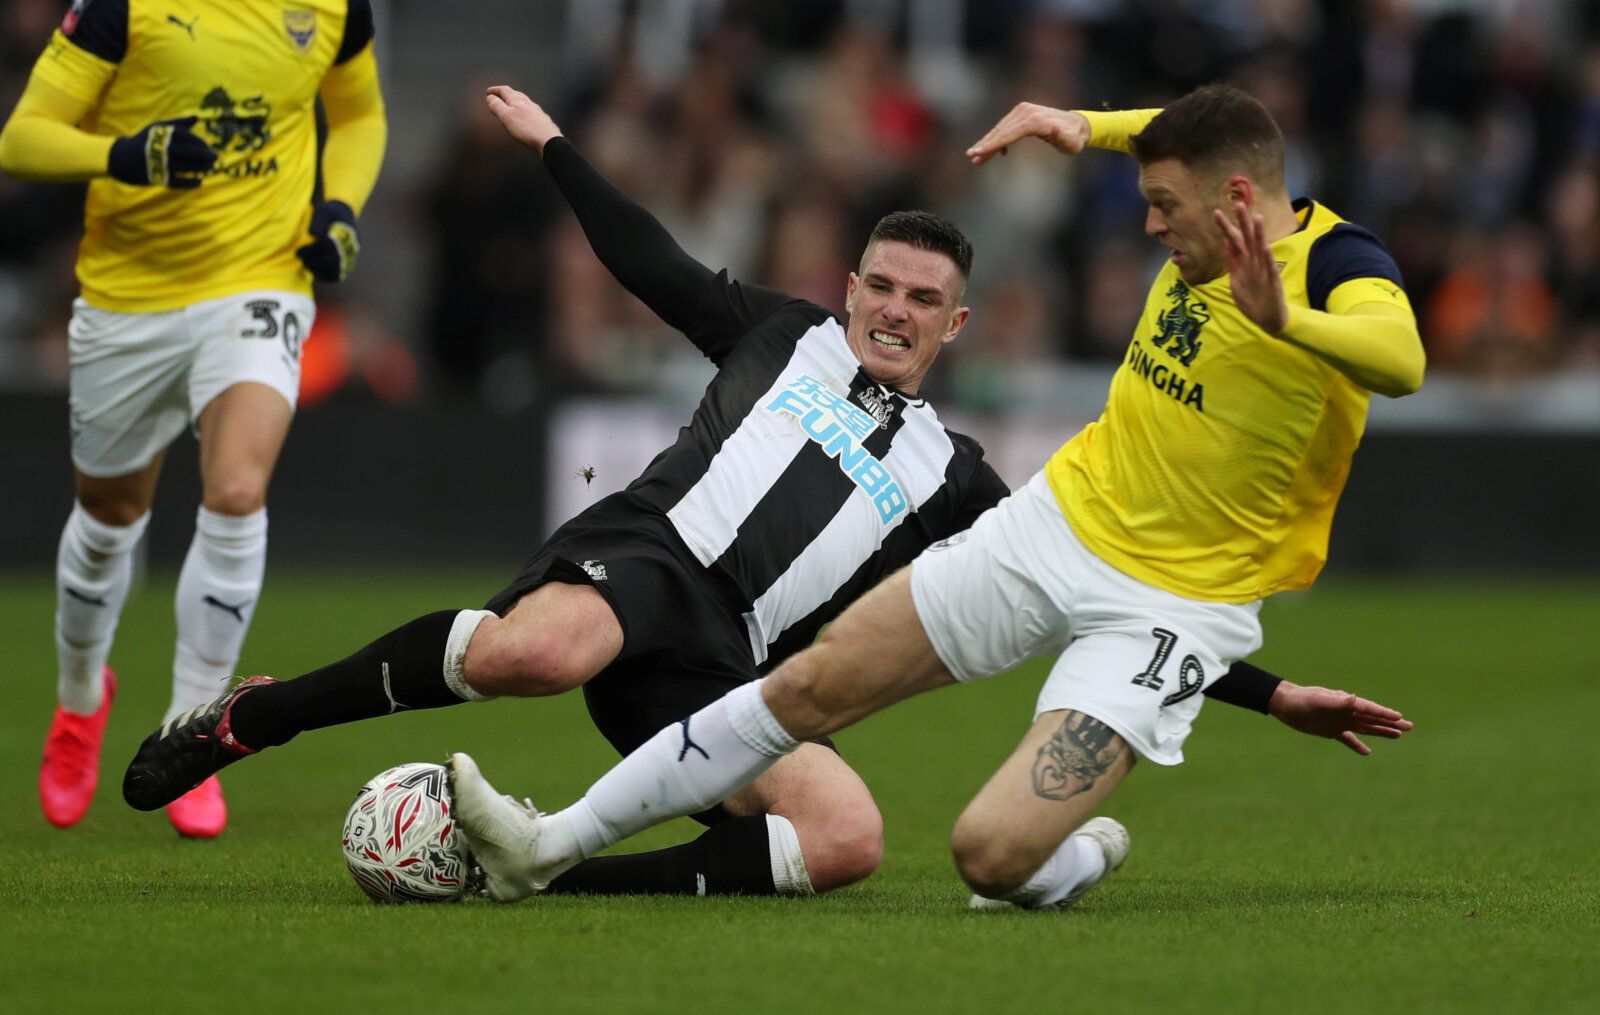 Soccer Football - FA Cup Fourth Round - Newcastle United v Oxford United - St James' Park, Newcastle, Britain - January 25, 2020  Oxford United's Jamie Mackie in action with Newcastle United's Ciaran Clark   Action Images via Reuters/Lee Smith